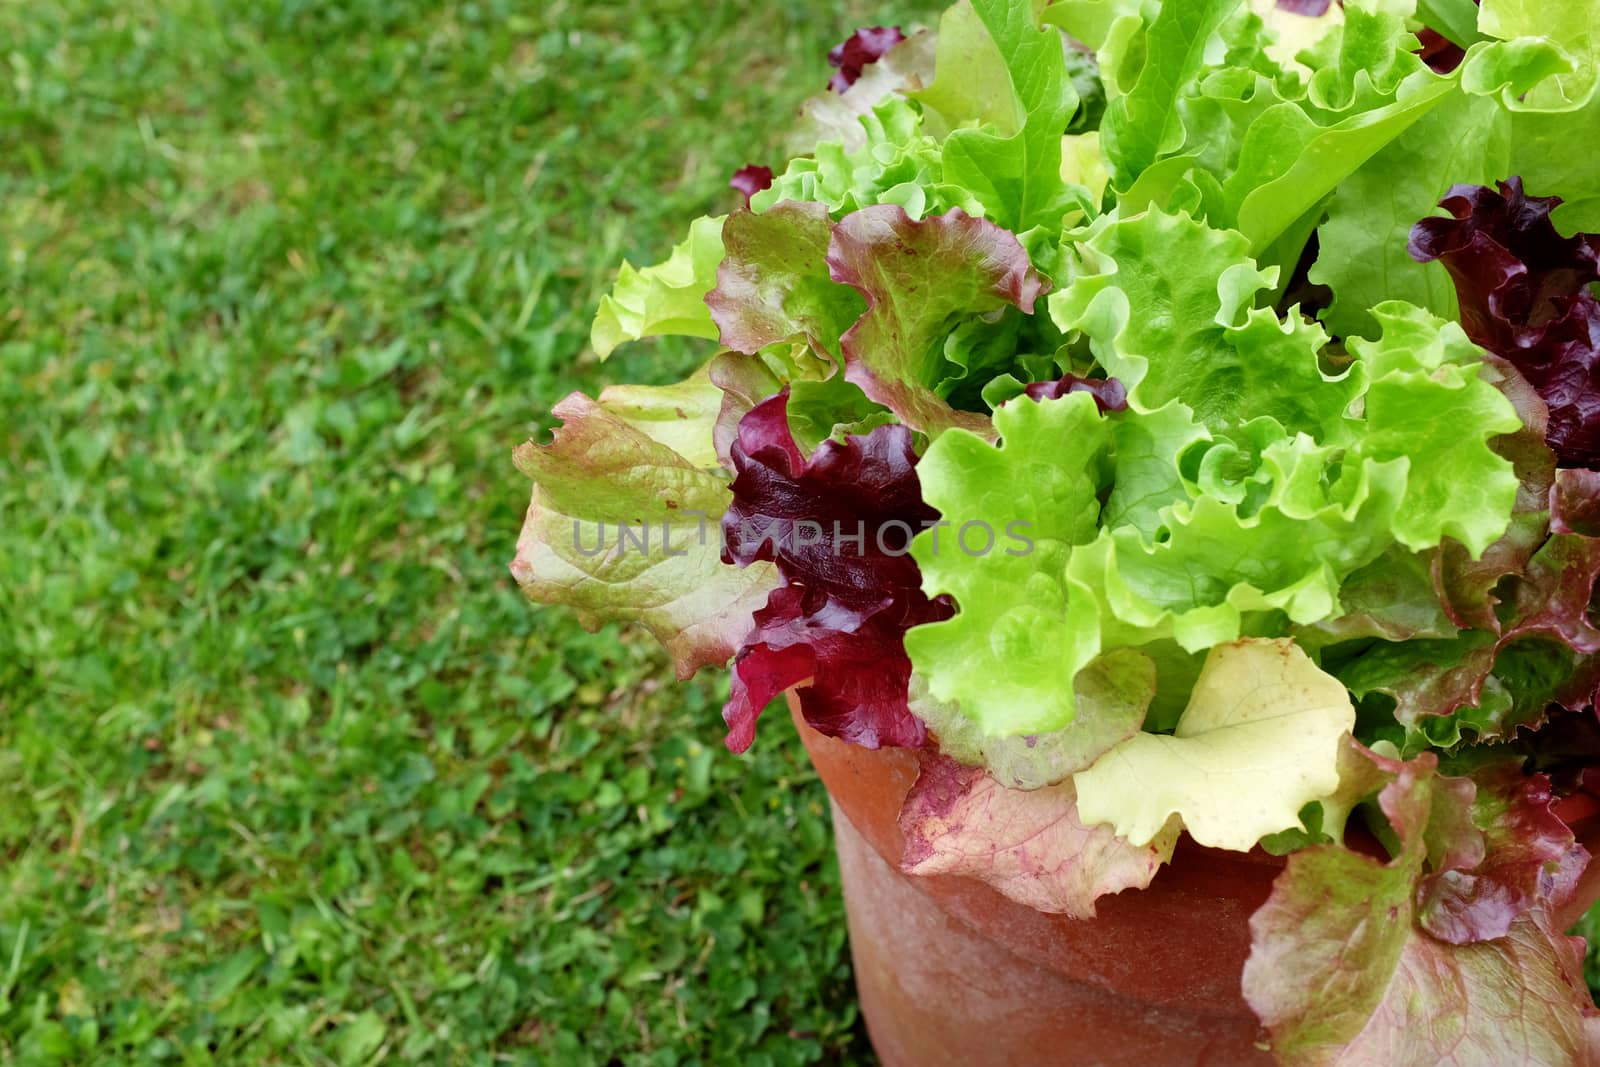 Flower pot full of mixed lettuce plants, red and green salad leaves with copy space on grass